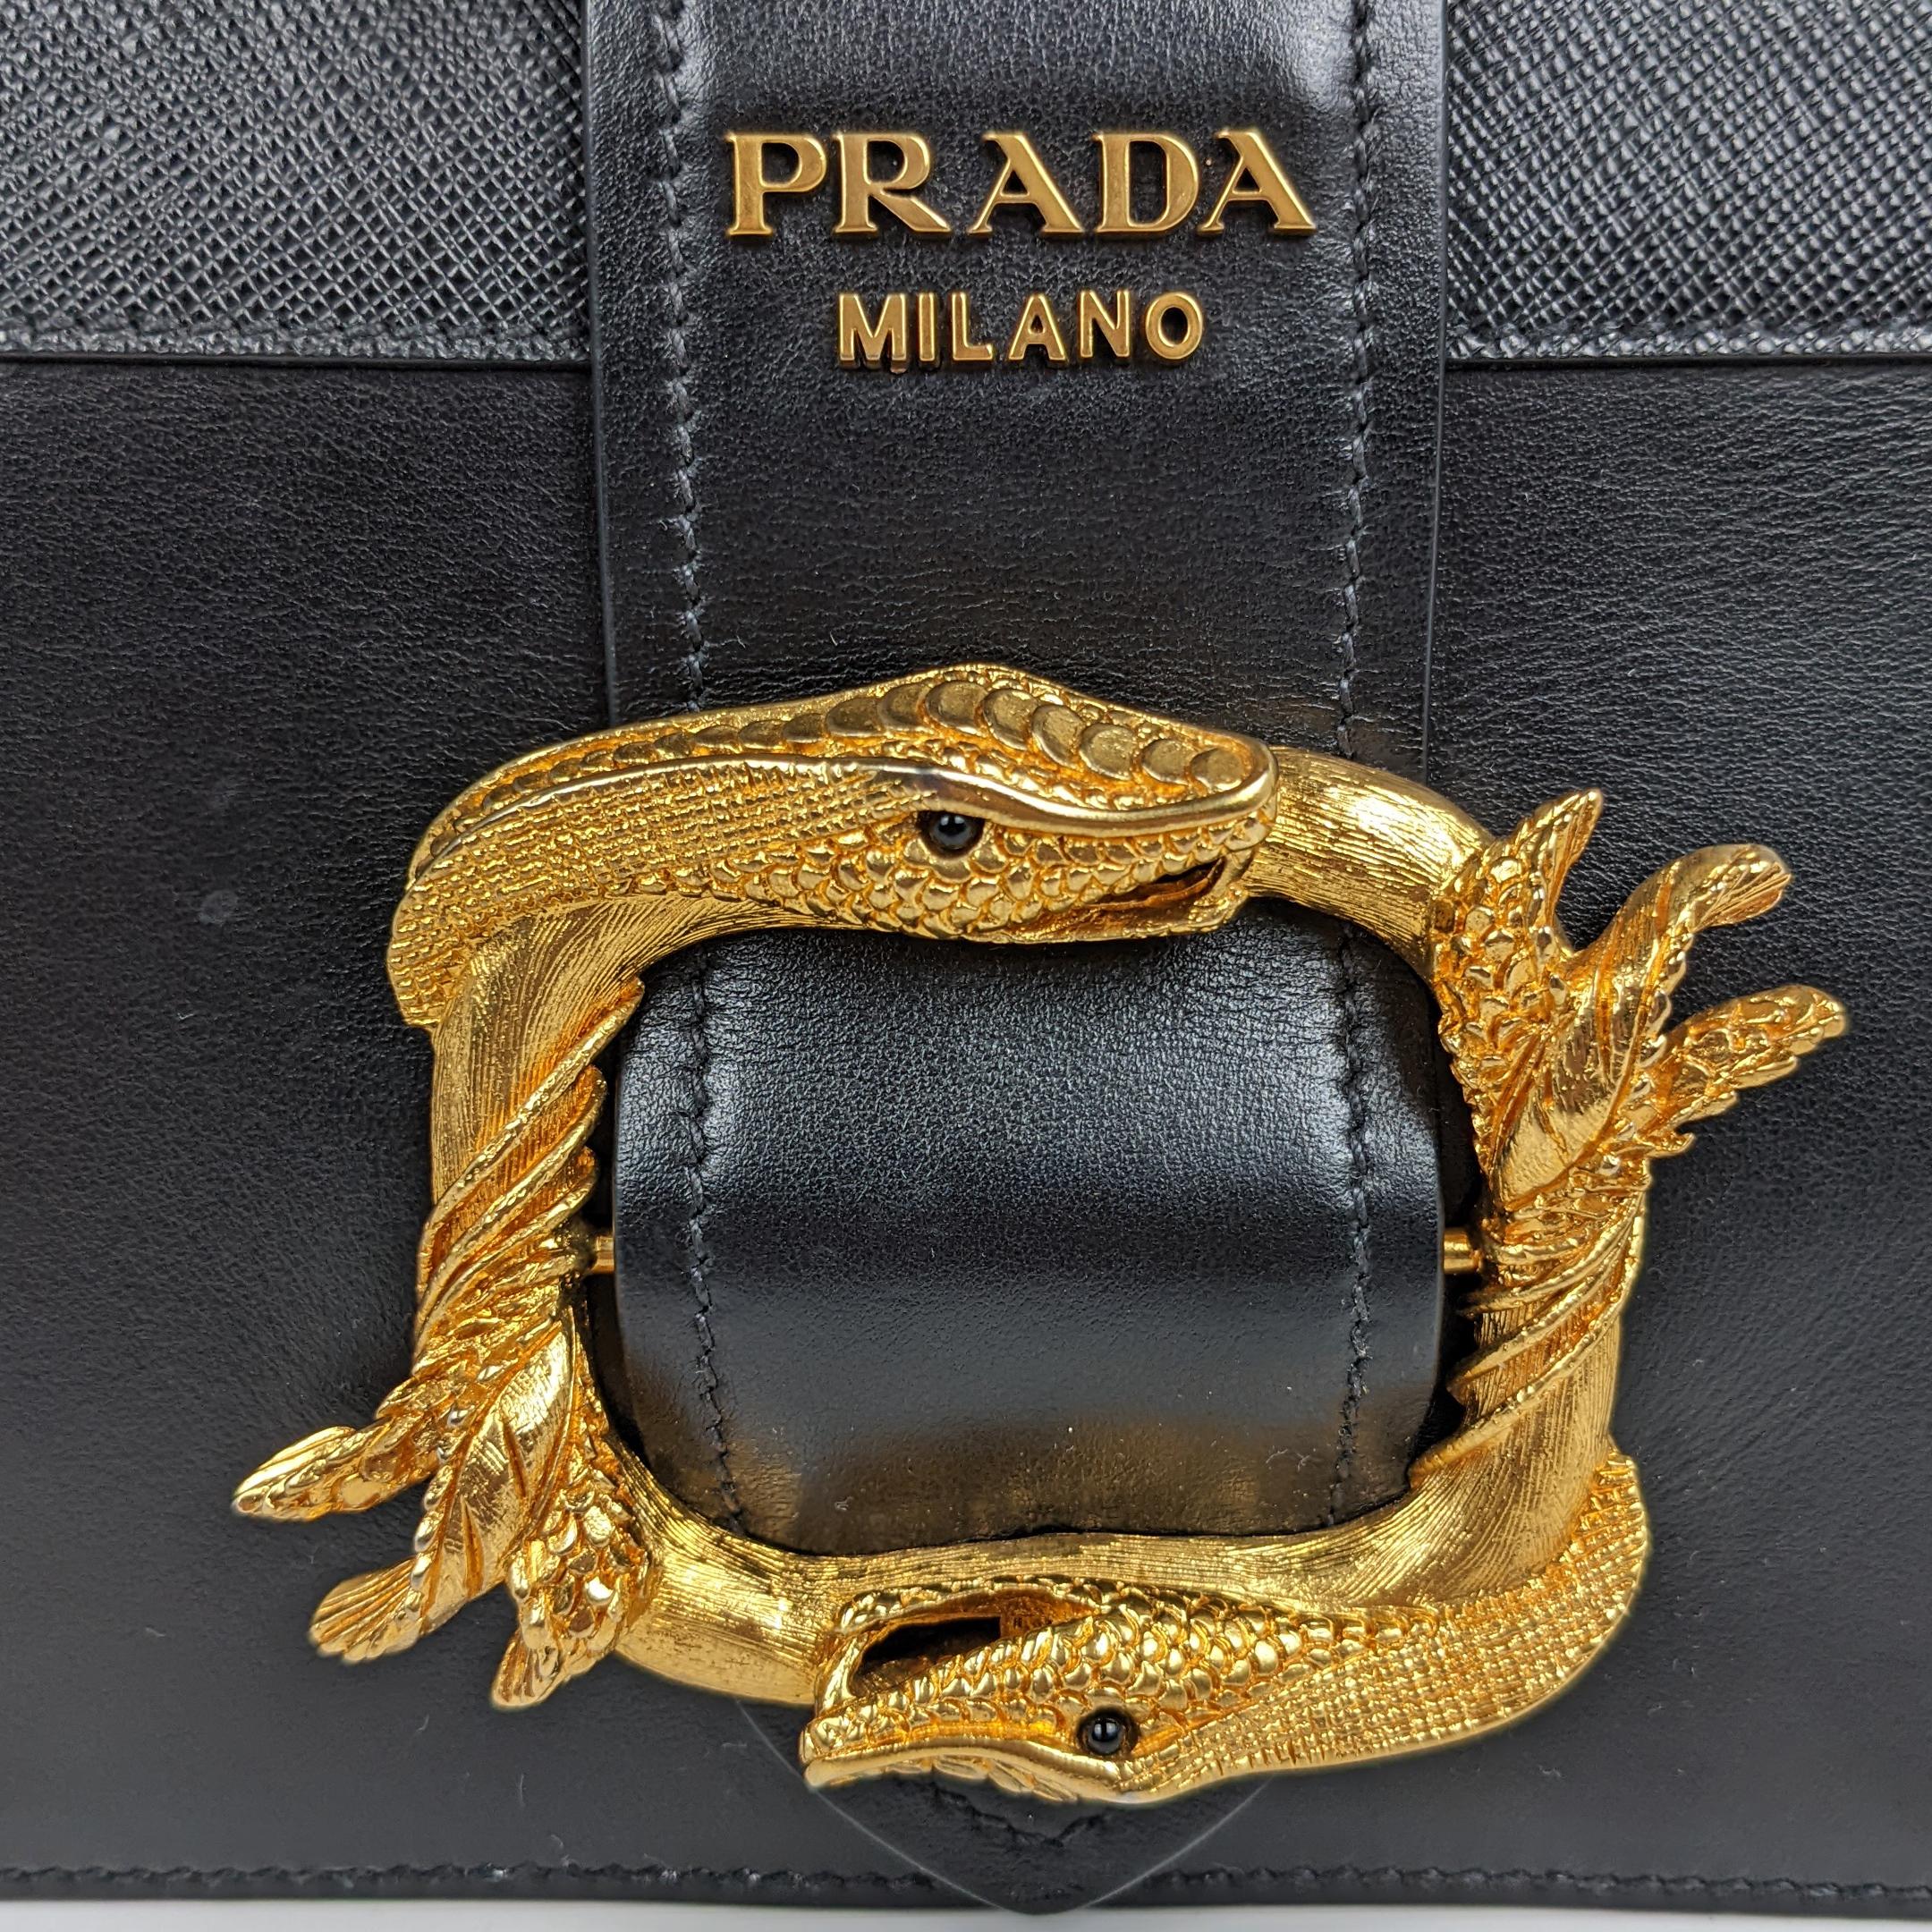 Condition: This super rare and authentic Prada bag is in great pre-loved condition. There is minor tarnishing/scratches to the hardware and light scratches to exterior leather and under flap. Some relaxing to bottom leather.

Includes: Authenticity